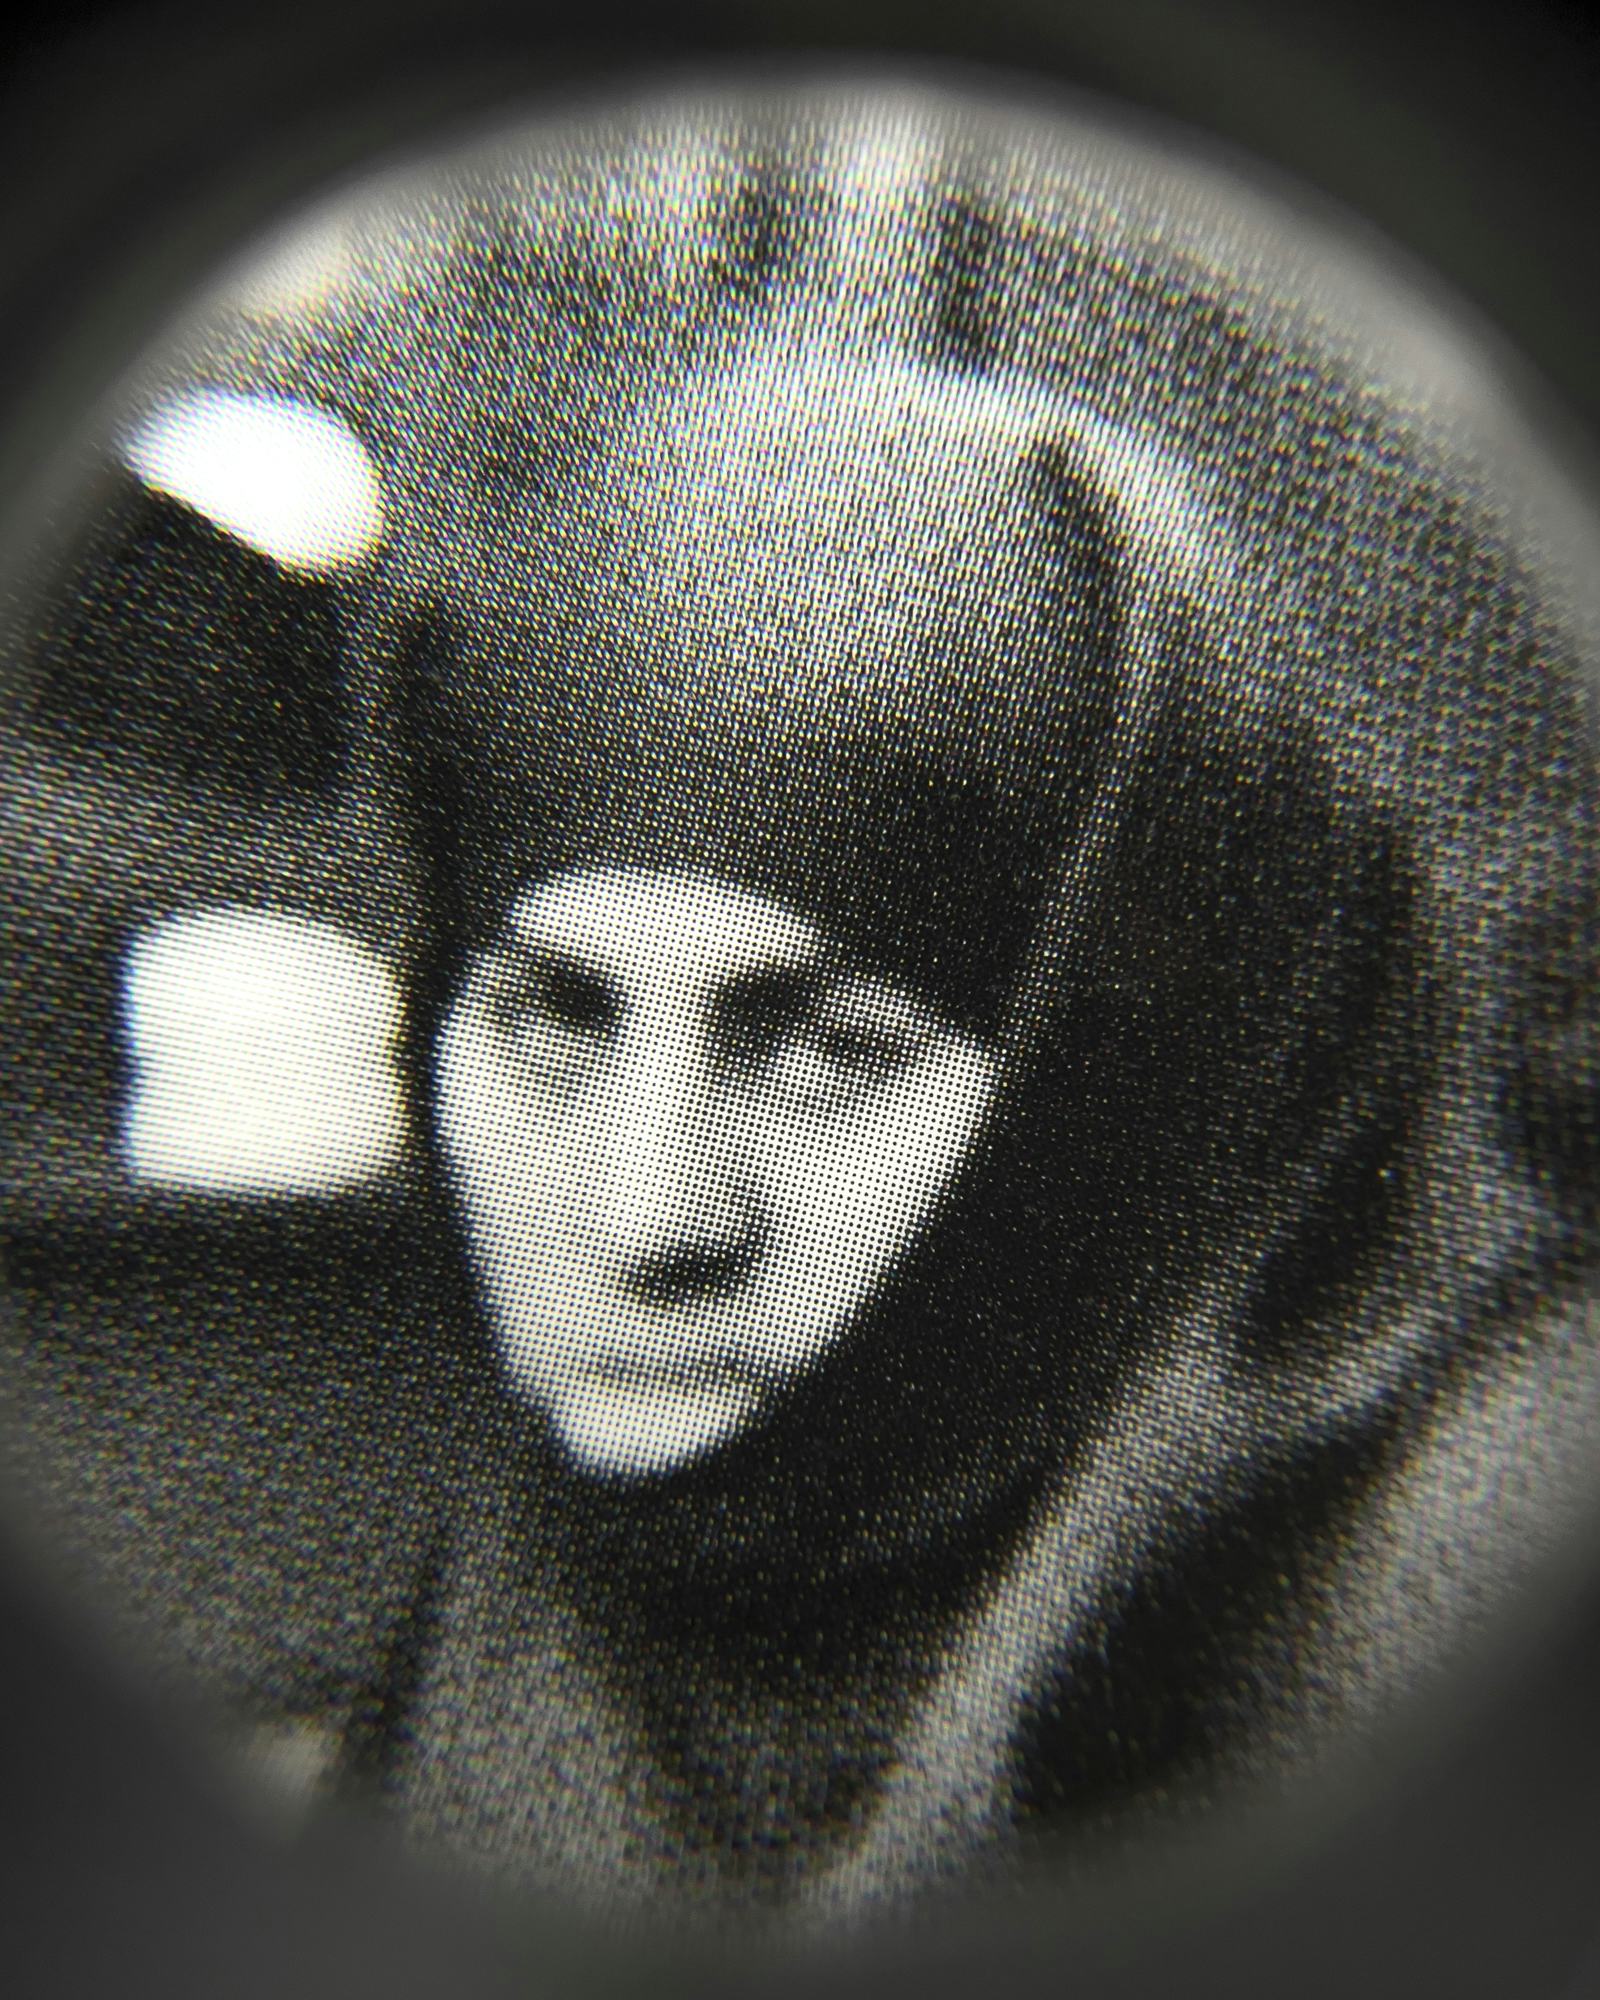 Black and white close-up image of an existing photograph, showing a woman wearing a chador, staring into the camera. Shot through a magnifying lens © Amin Yousefi